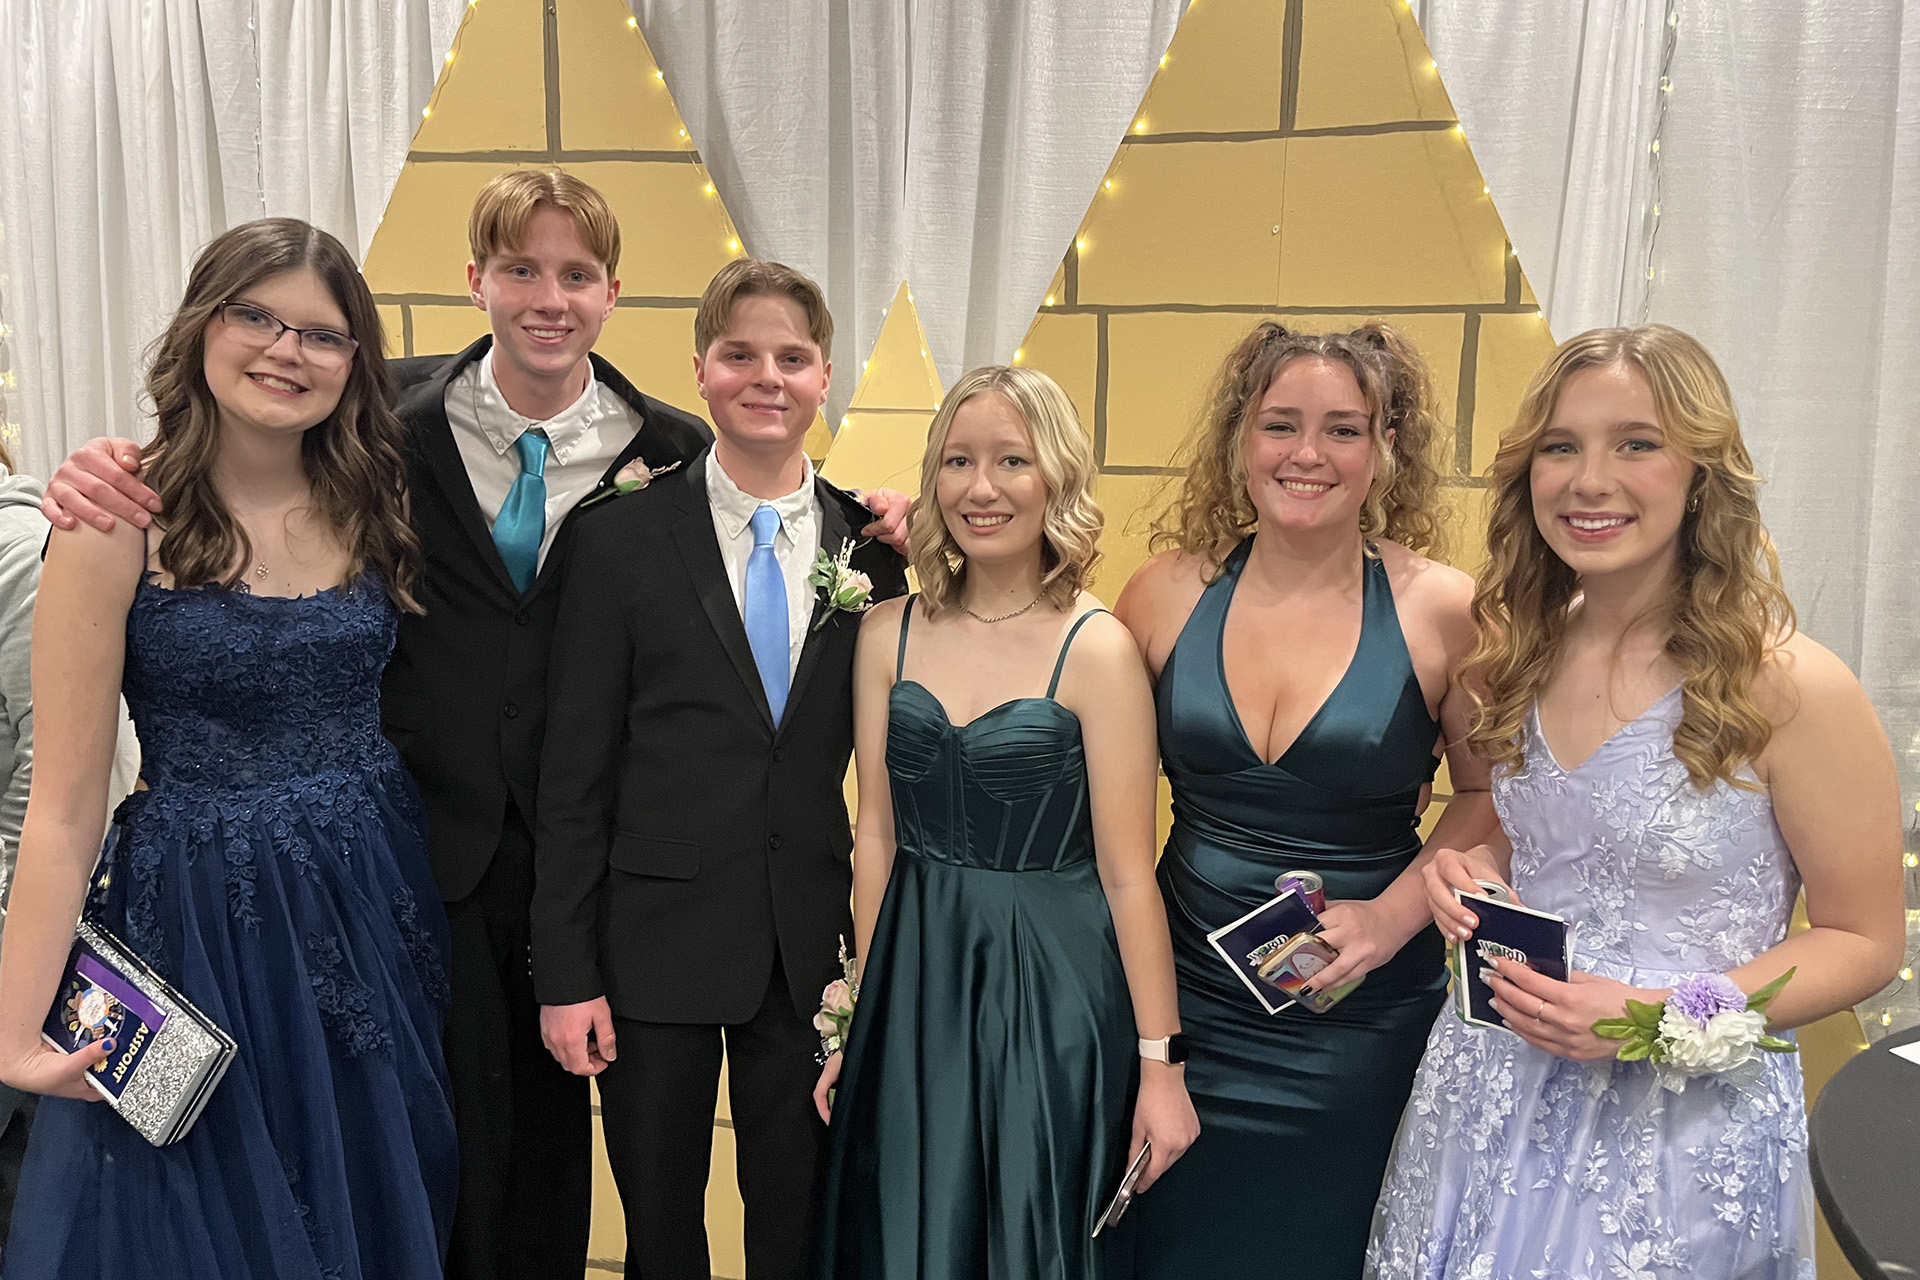 Dressed up and dazzling, teen patients celebrate prom